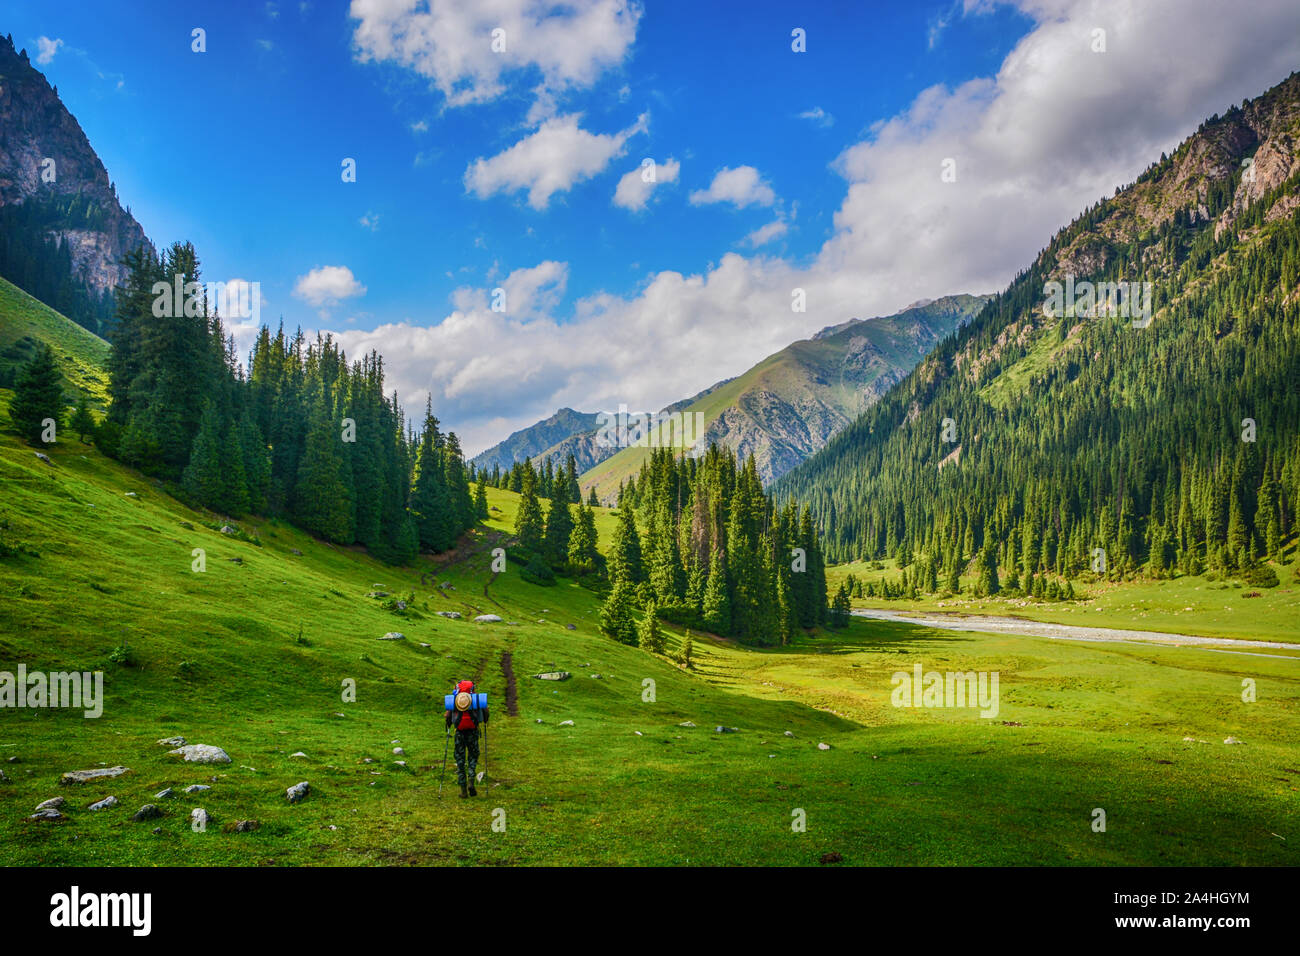 Idyllic summer landscape with hiker in the mountains with beautiful fresh green mountain pastures and forest. Concept of outdoor activities and advent Stock Photo